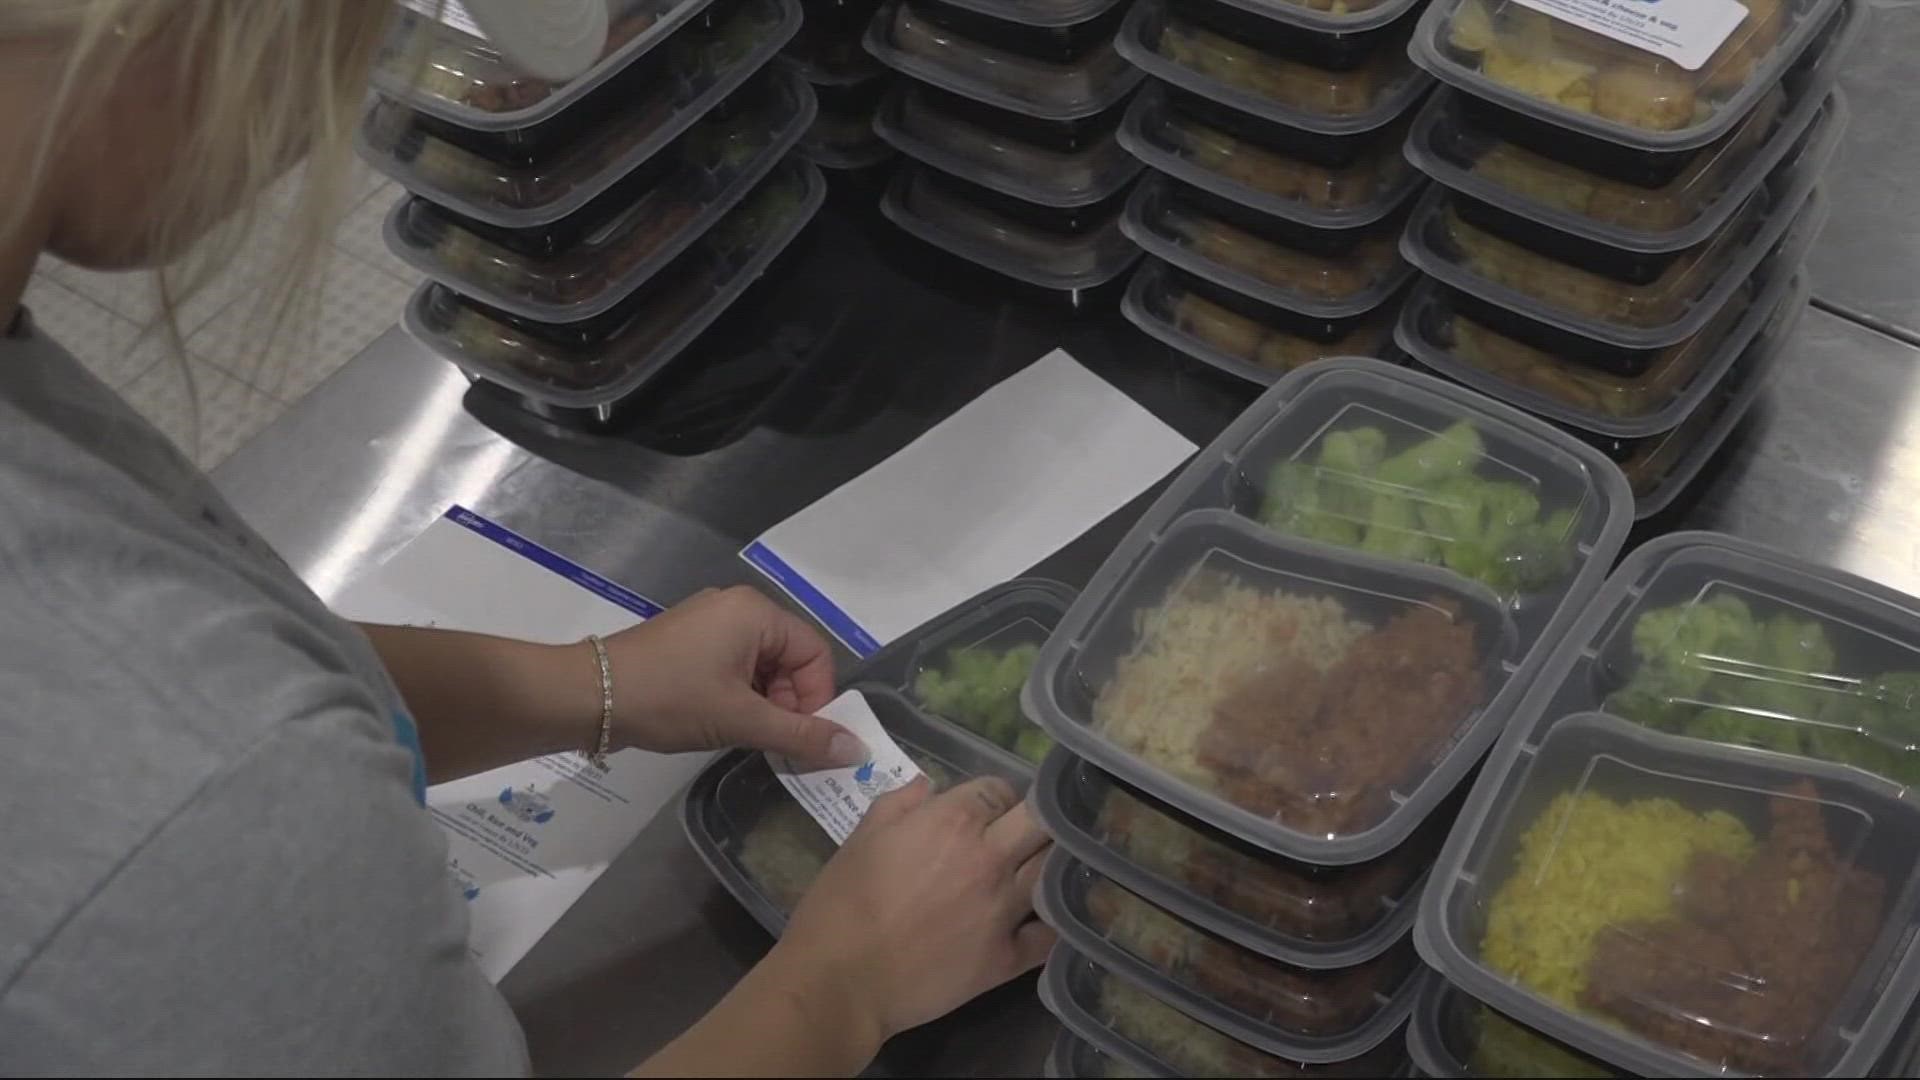 The extra food is recovered from area hospitals and then repurposed for seniors.